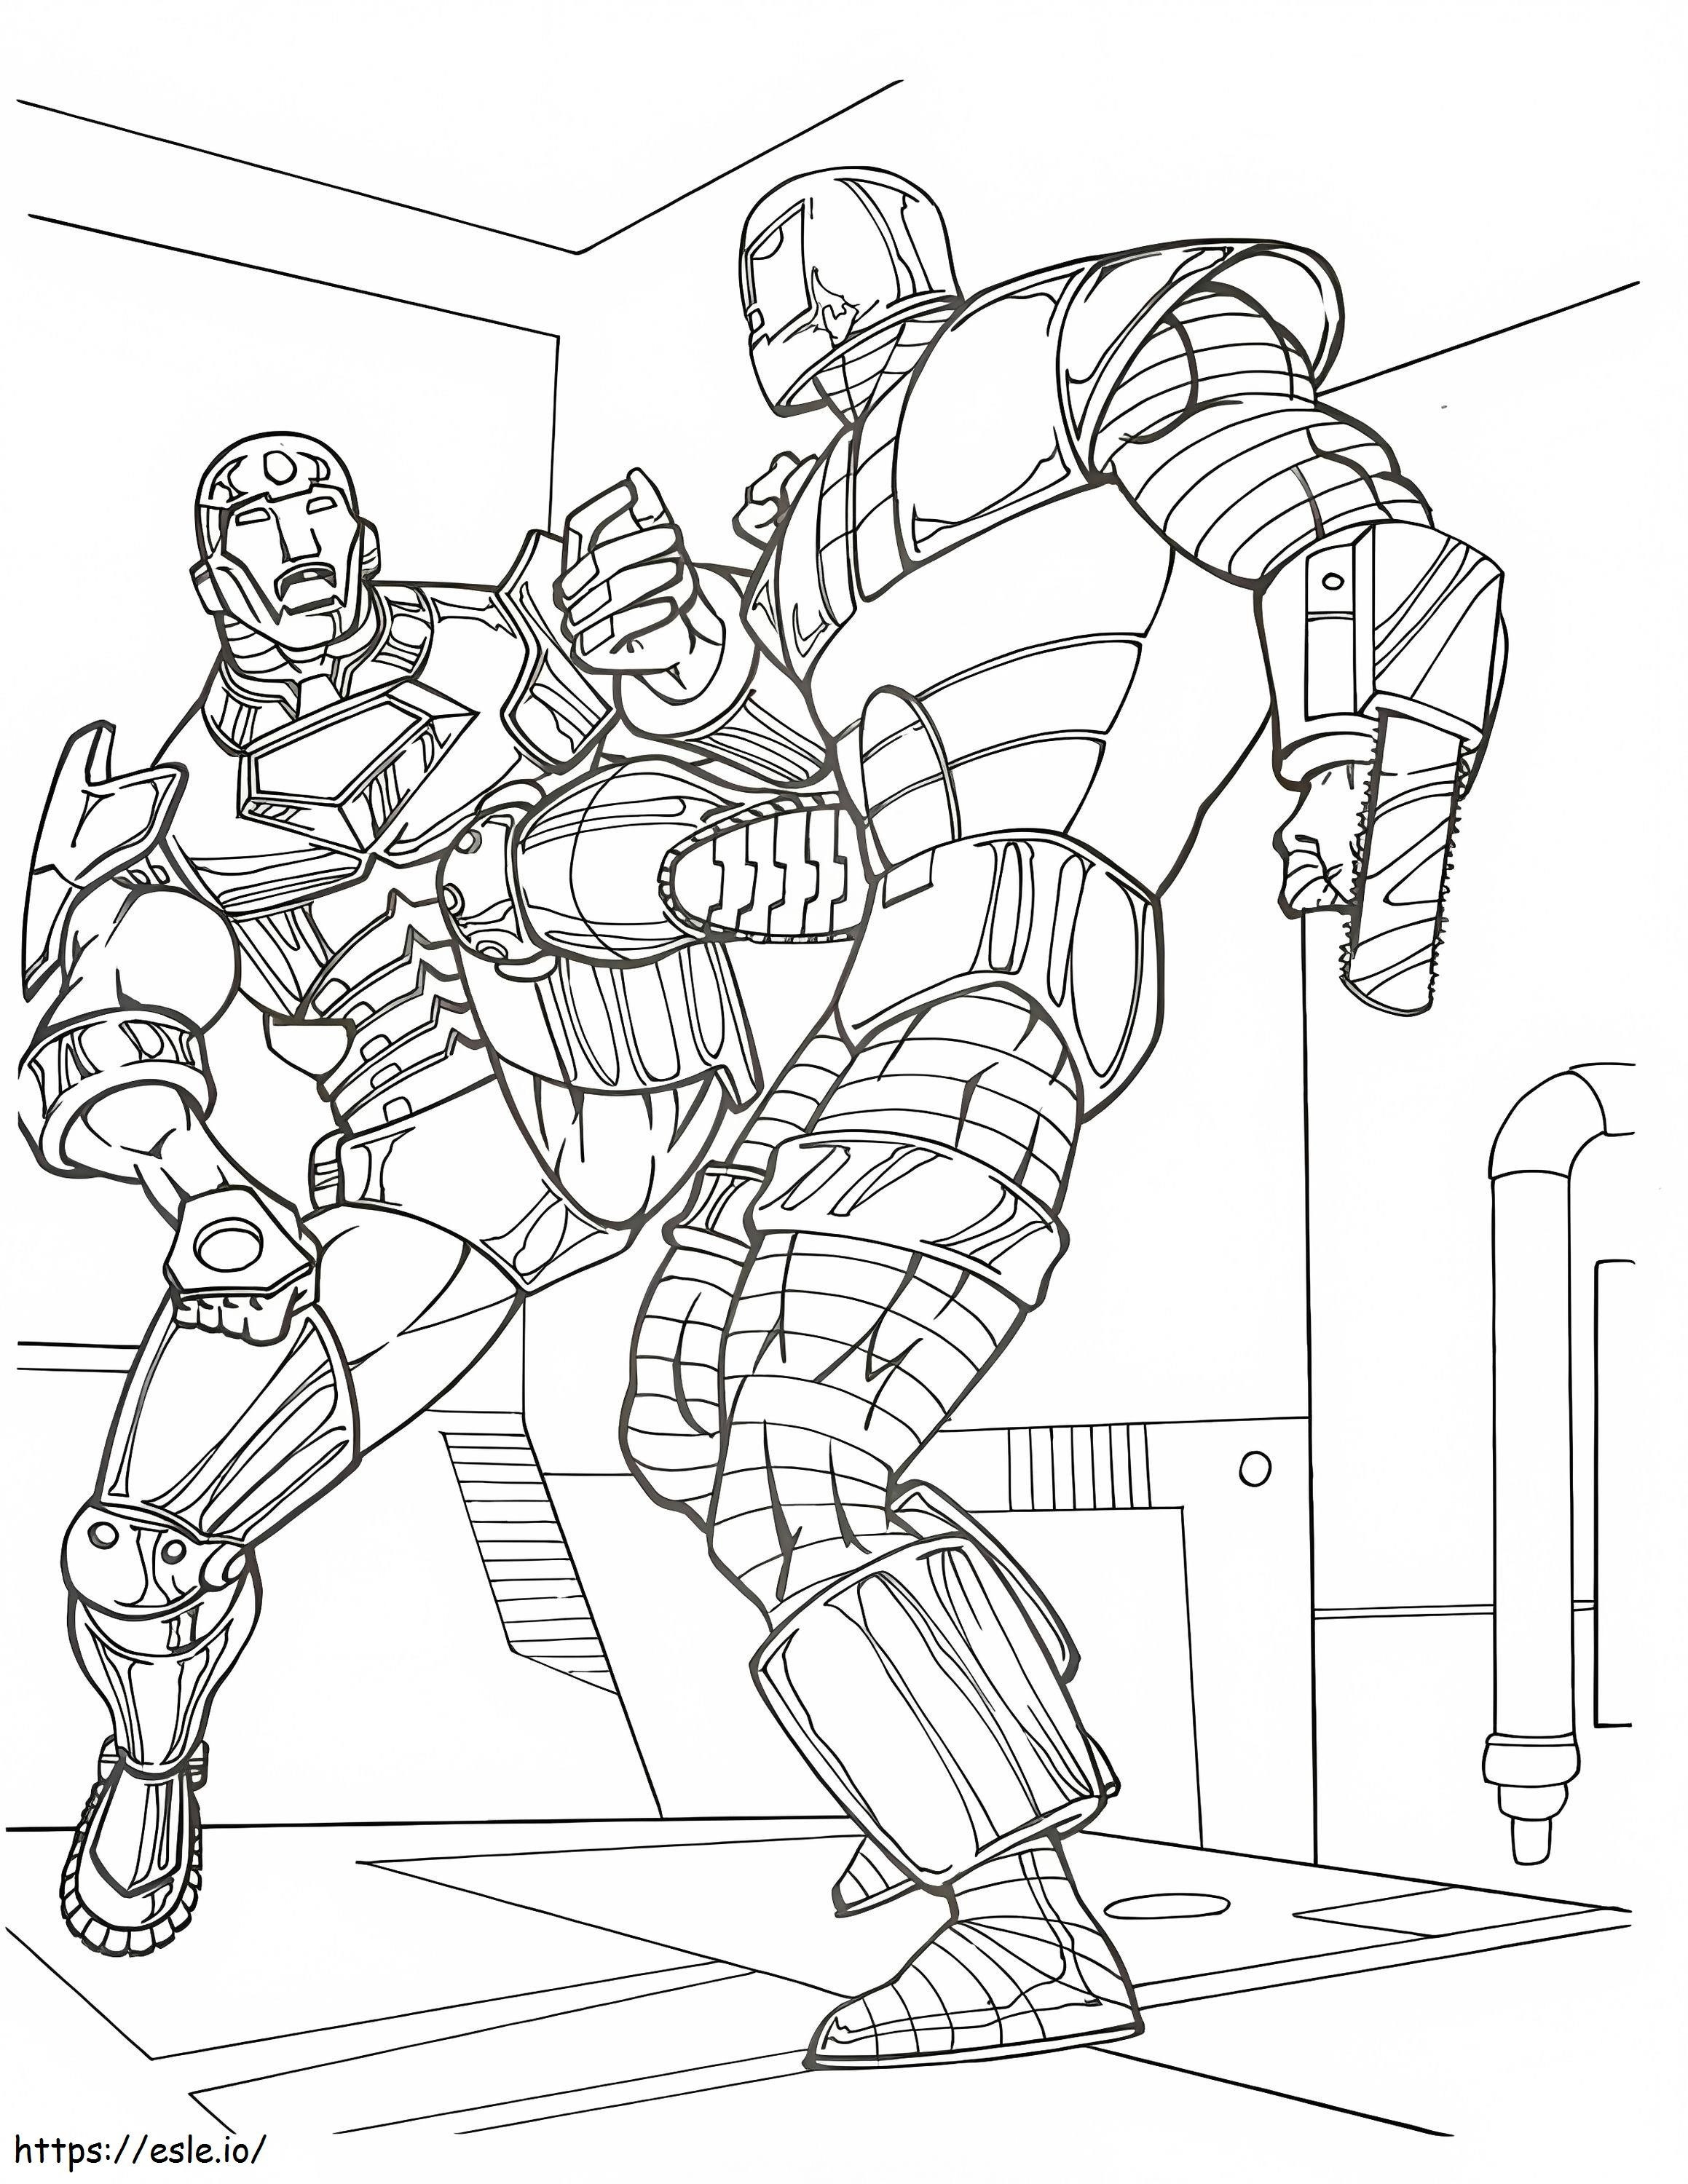 Iron Man Fight Scene coloring page